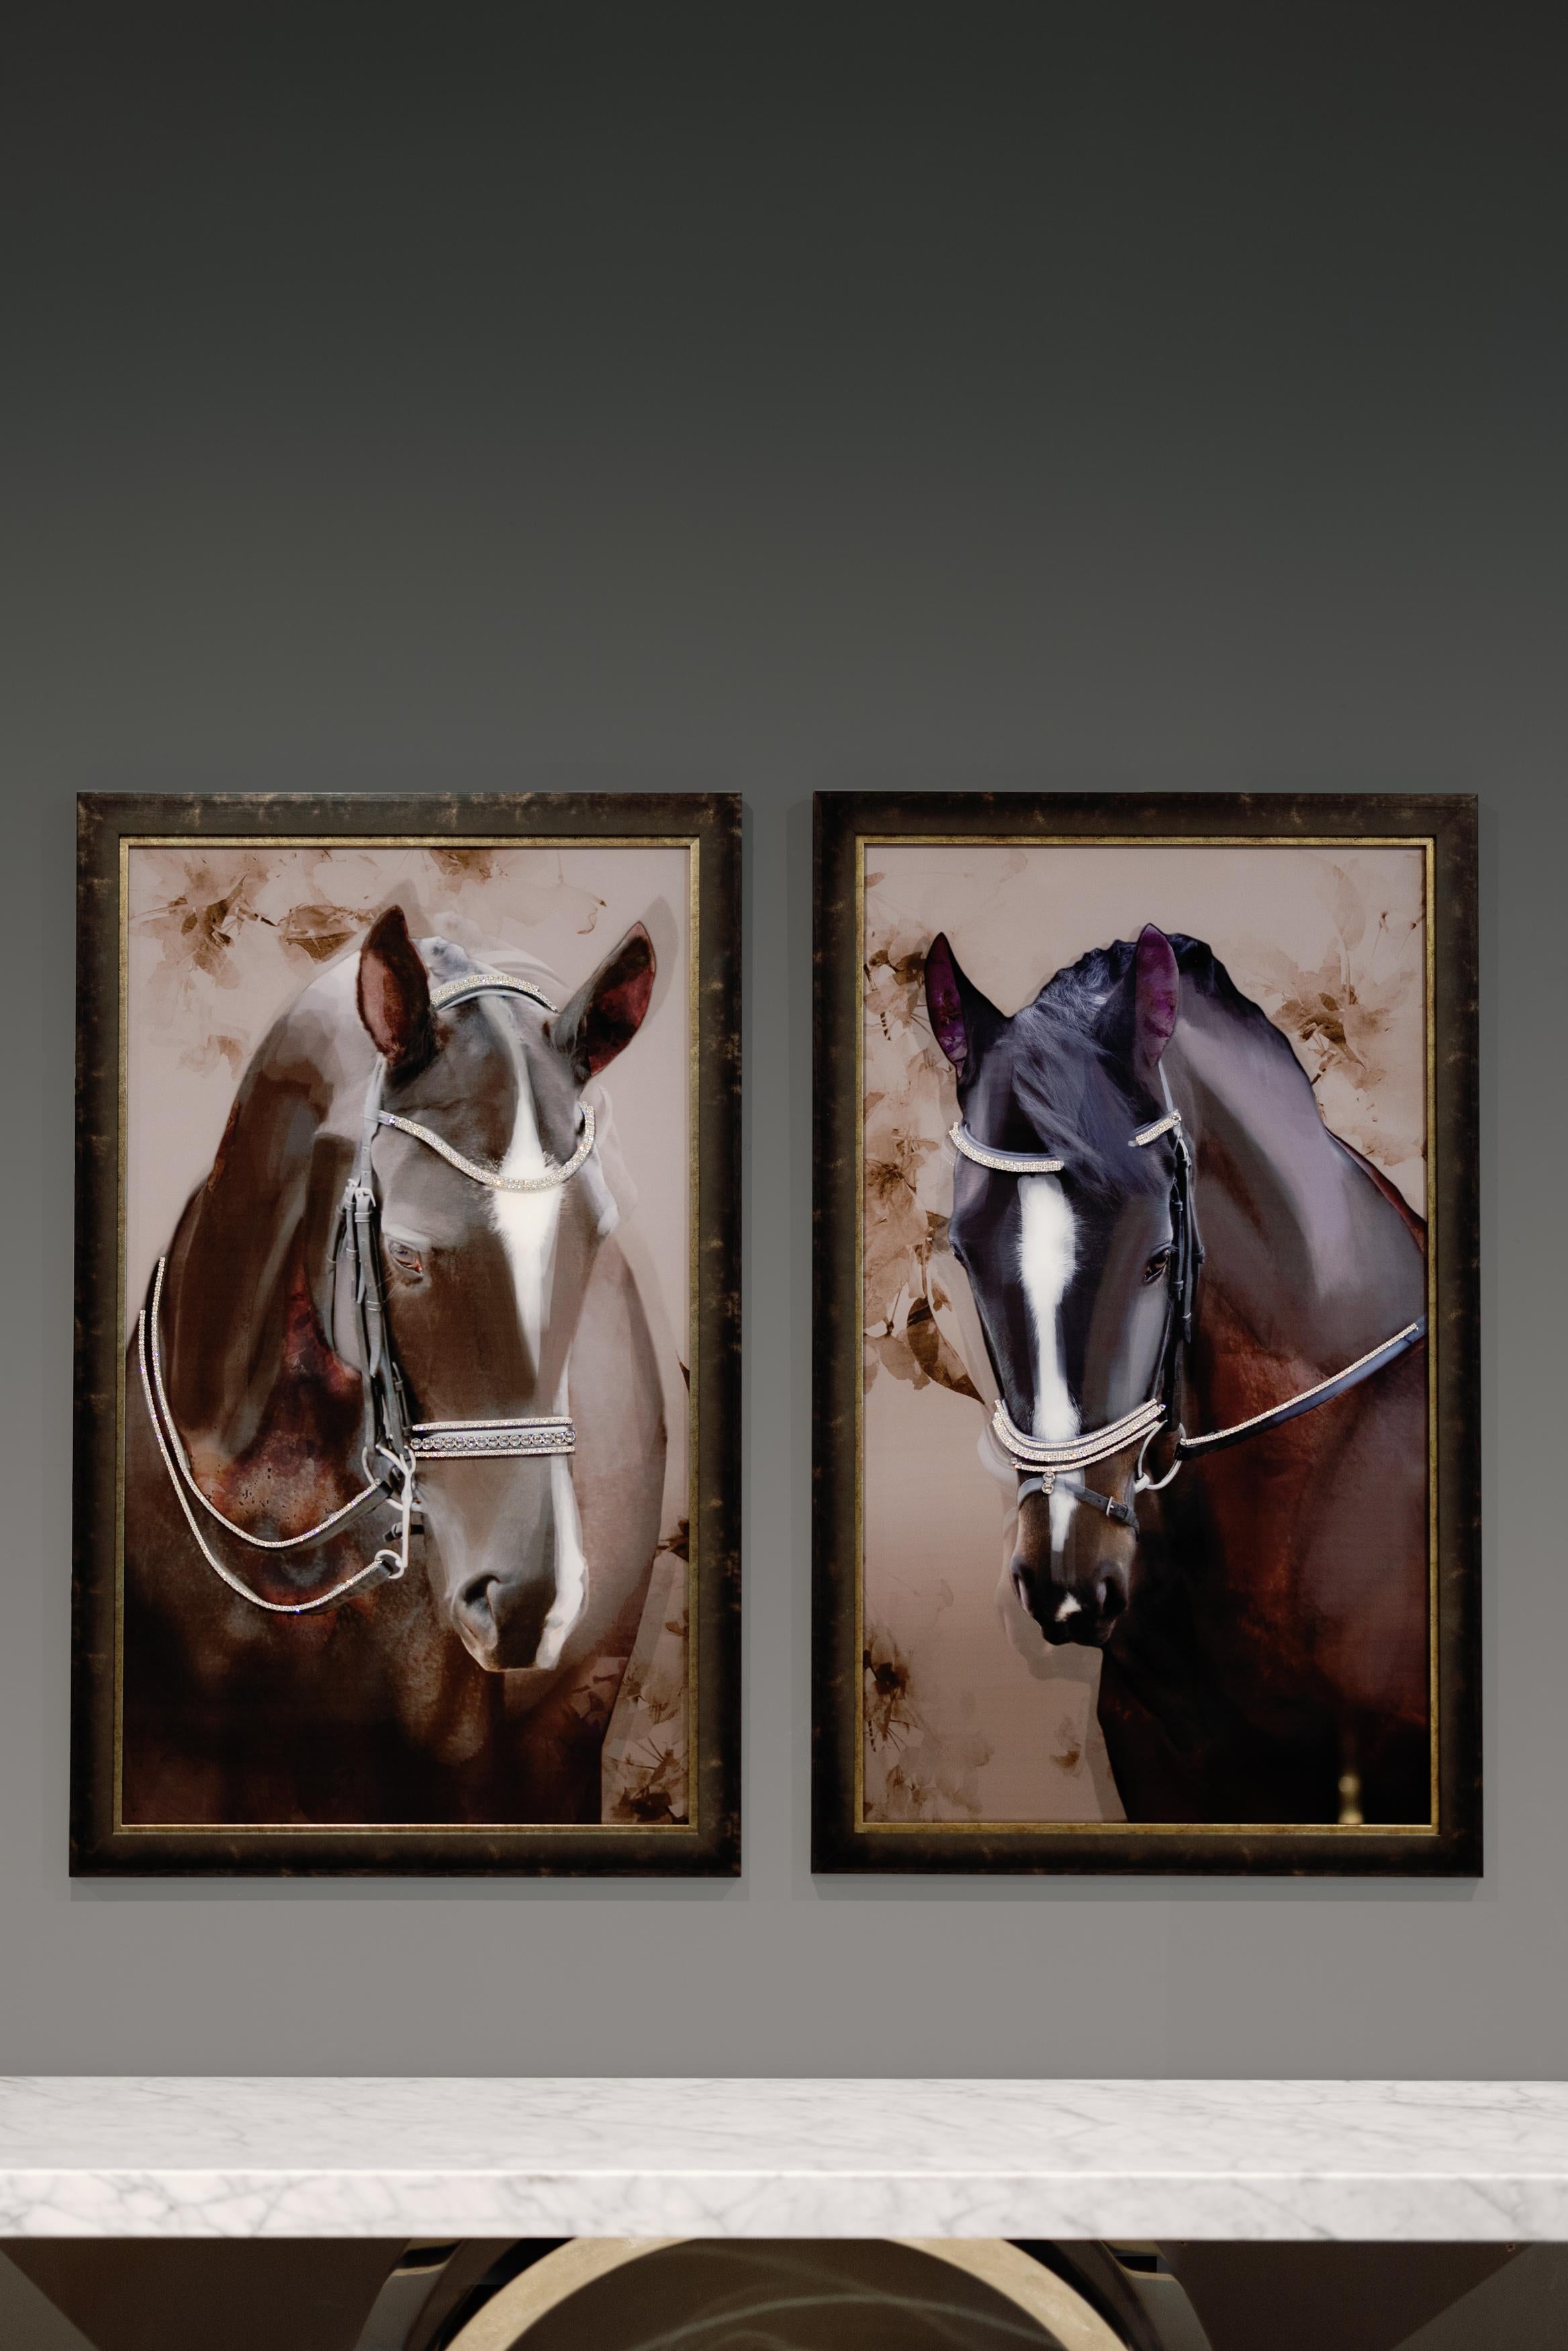 Mustang Wall Art, Lusitanus Home Collection, Handcrafted in Portugal - Europe by Lusitanus Home.

Wall art with exclusive Greenapple design printed on glass with handmade Swarovski® crystals. Frame made of pine wood. An exquisite and sophisticated